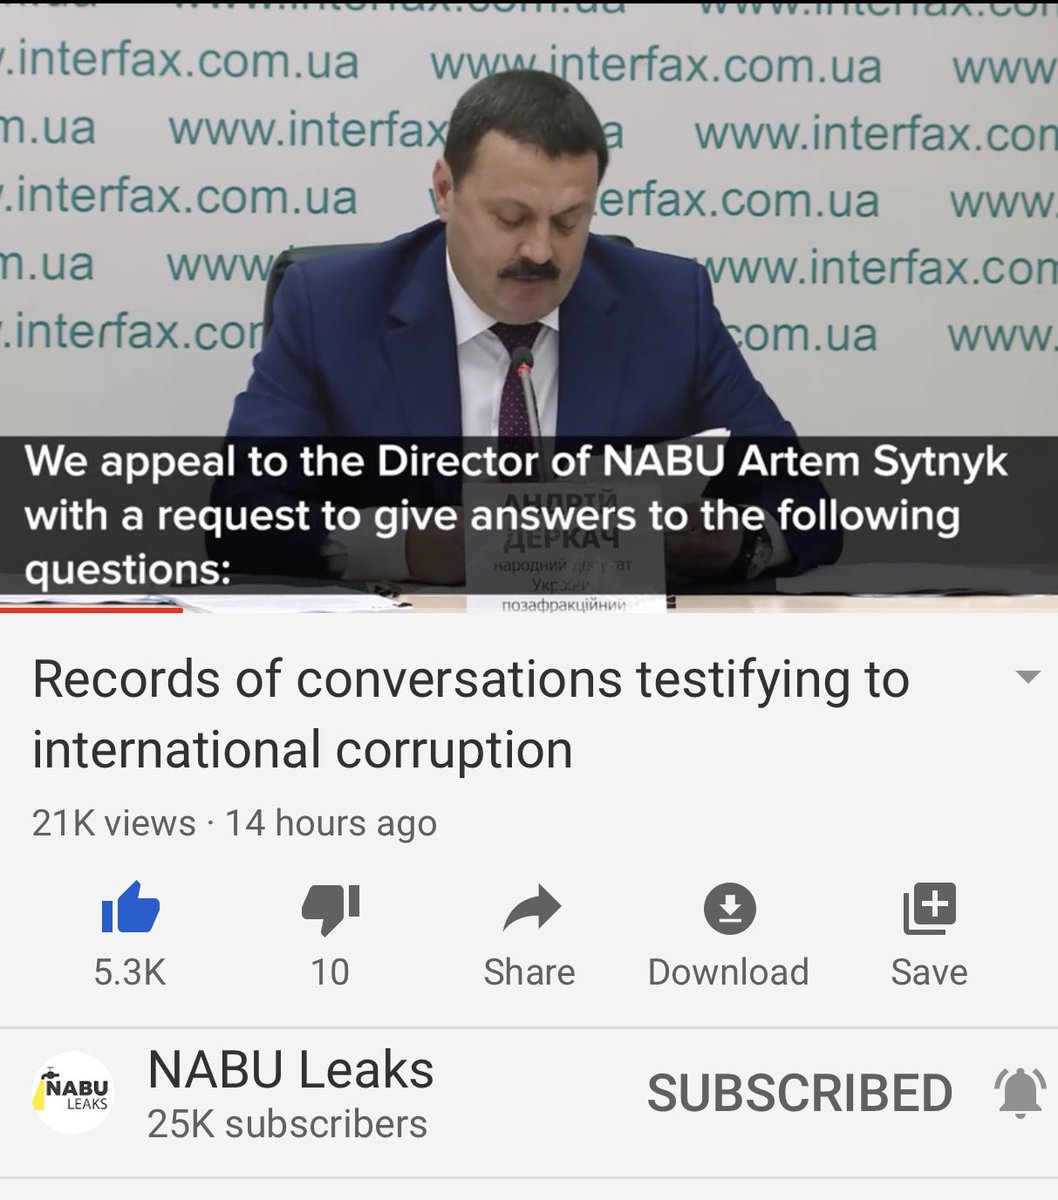 They know it was the Dems, et al, who put Shokins life in danger. They’d also like to speak to Sytnyk, wondering if he’s still hanging with Poroshenko, how much is he getting to leak info....